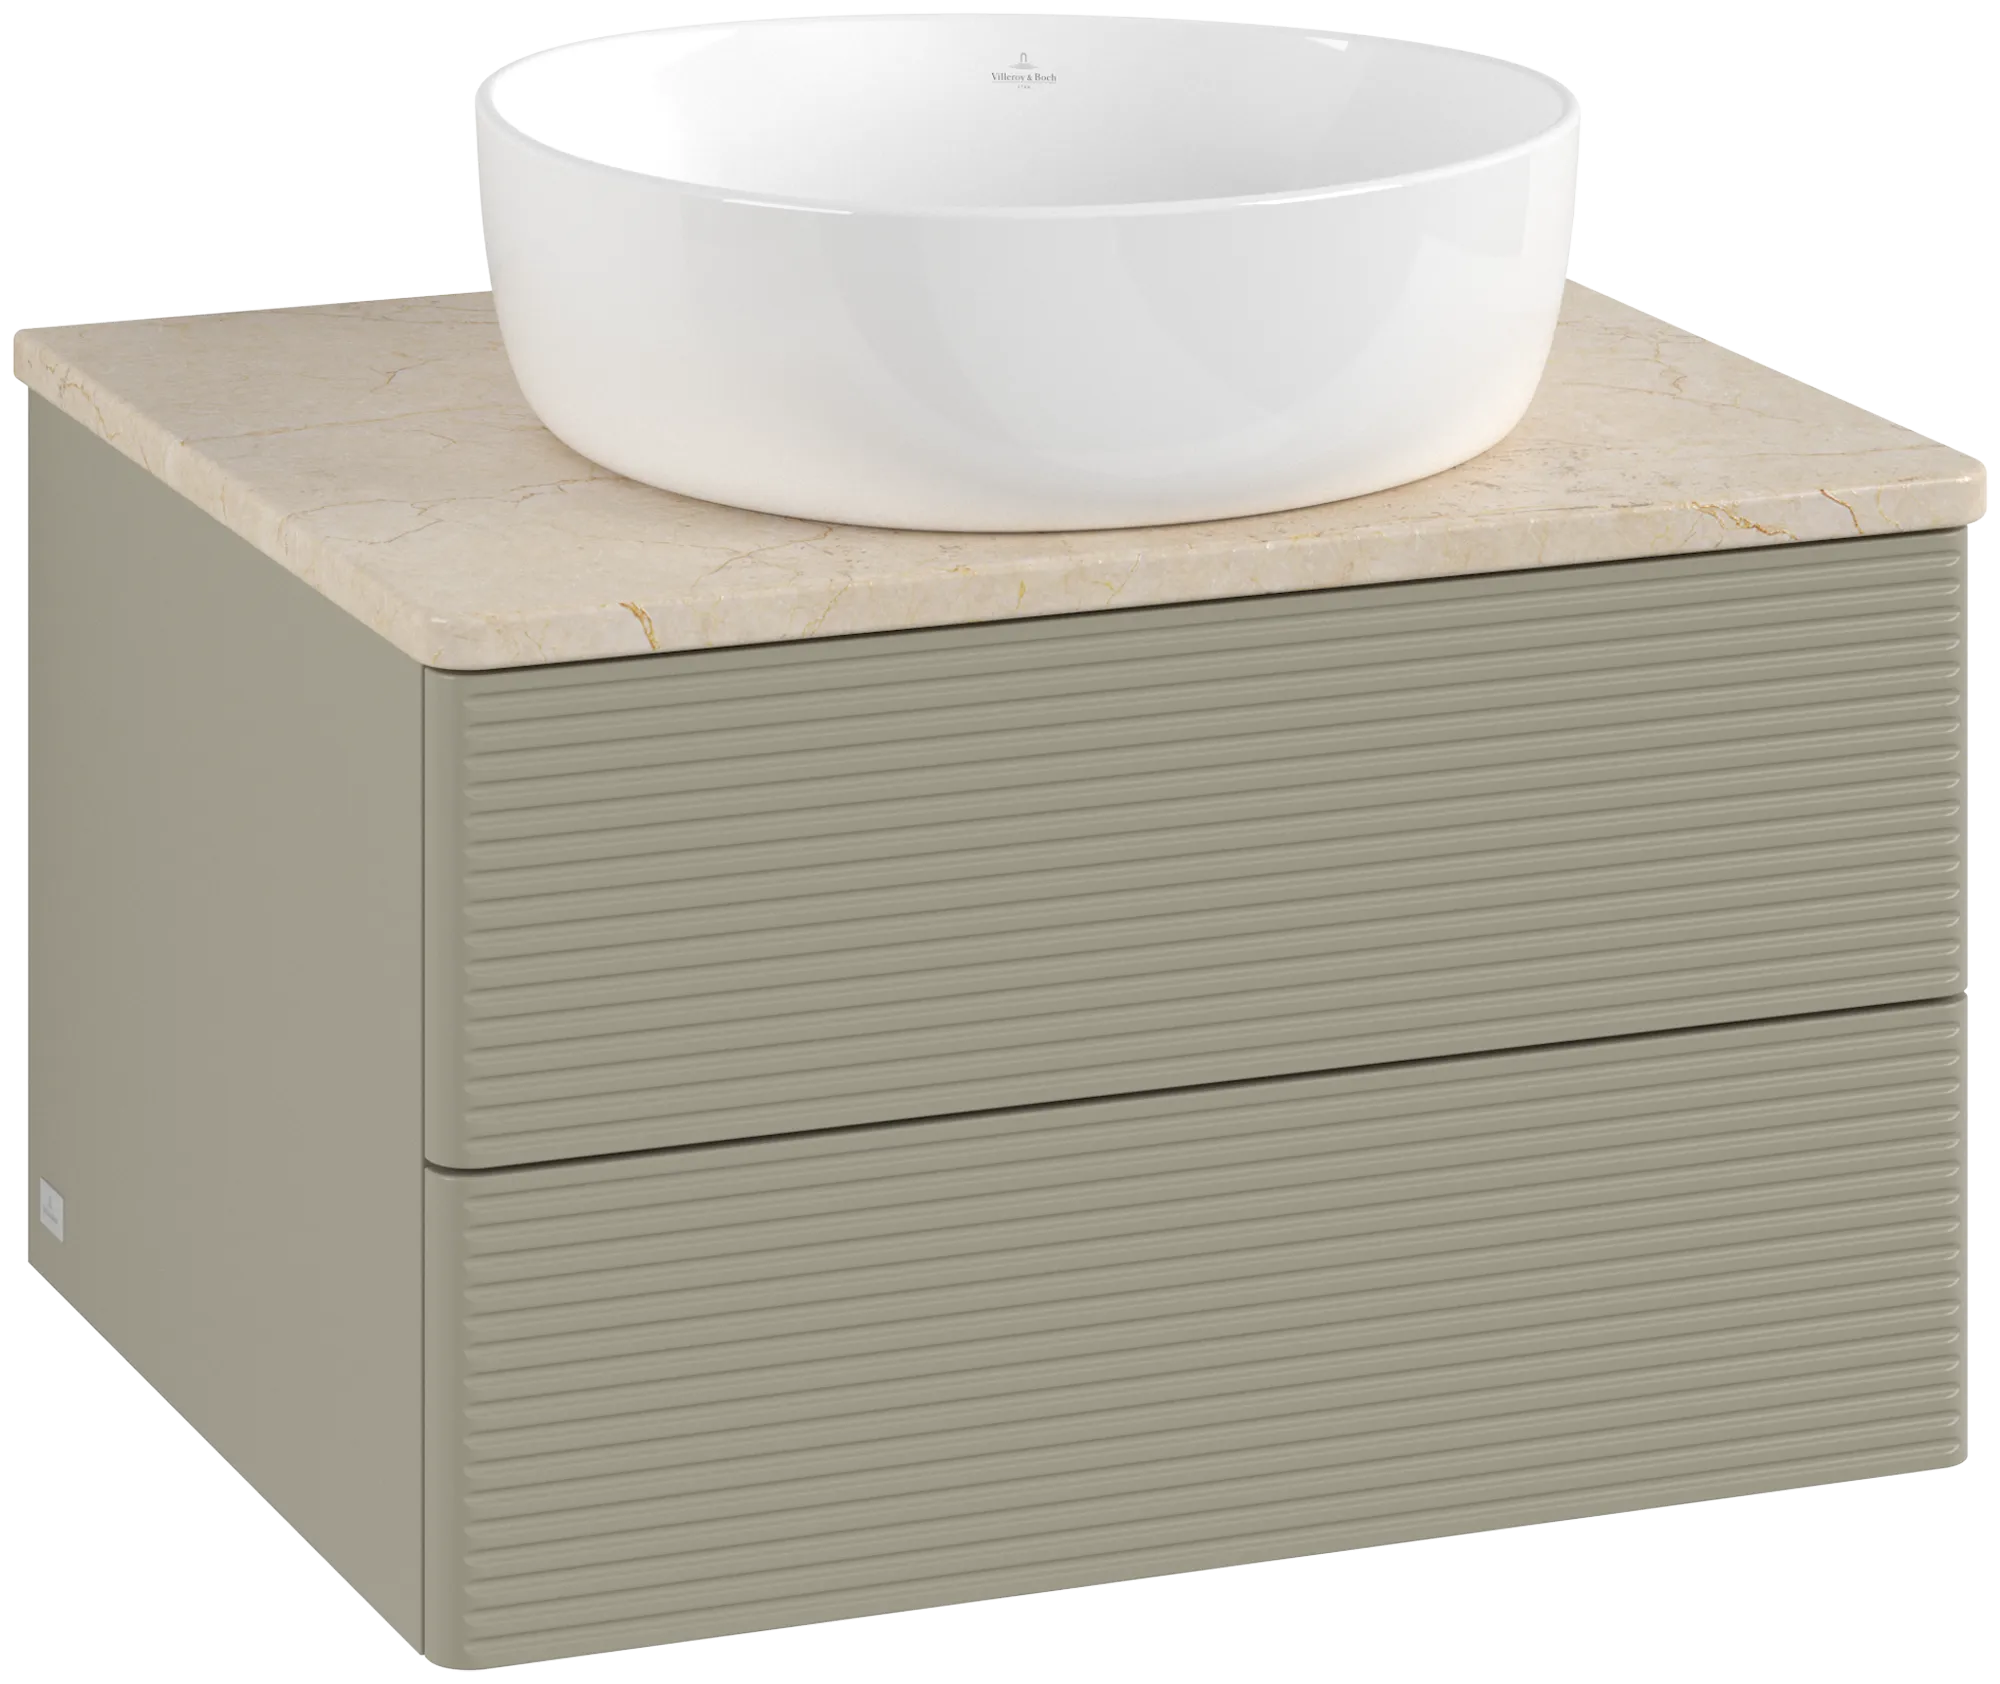 Picture of VILLEROY BOCH Antao Vanity unit, with lighting, 2 pull-out compartments, 600 x 360 x 500 mm, Front with grain texture, Stone Grey Matt Lacquer / Botticino #L18113HK